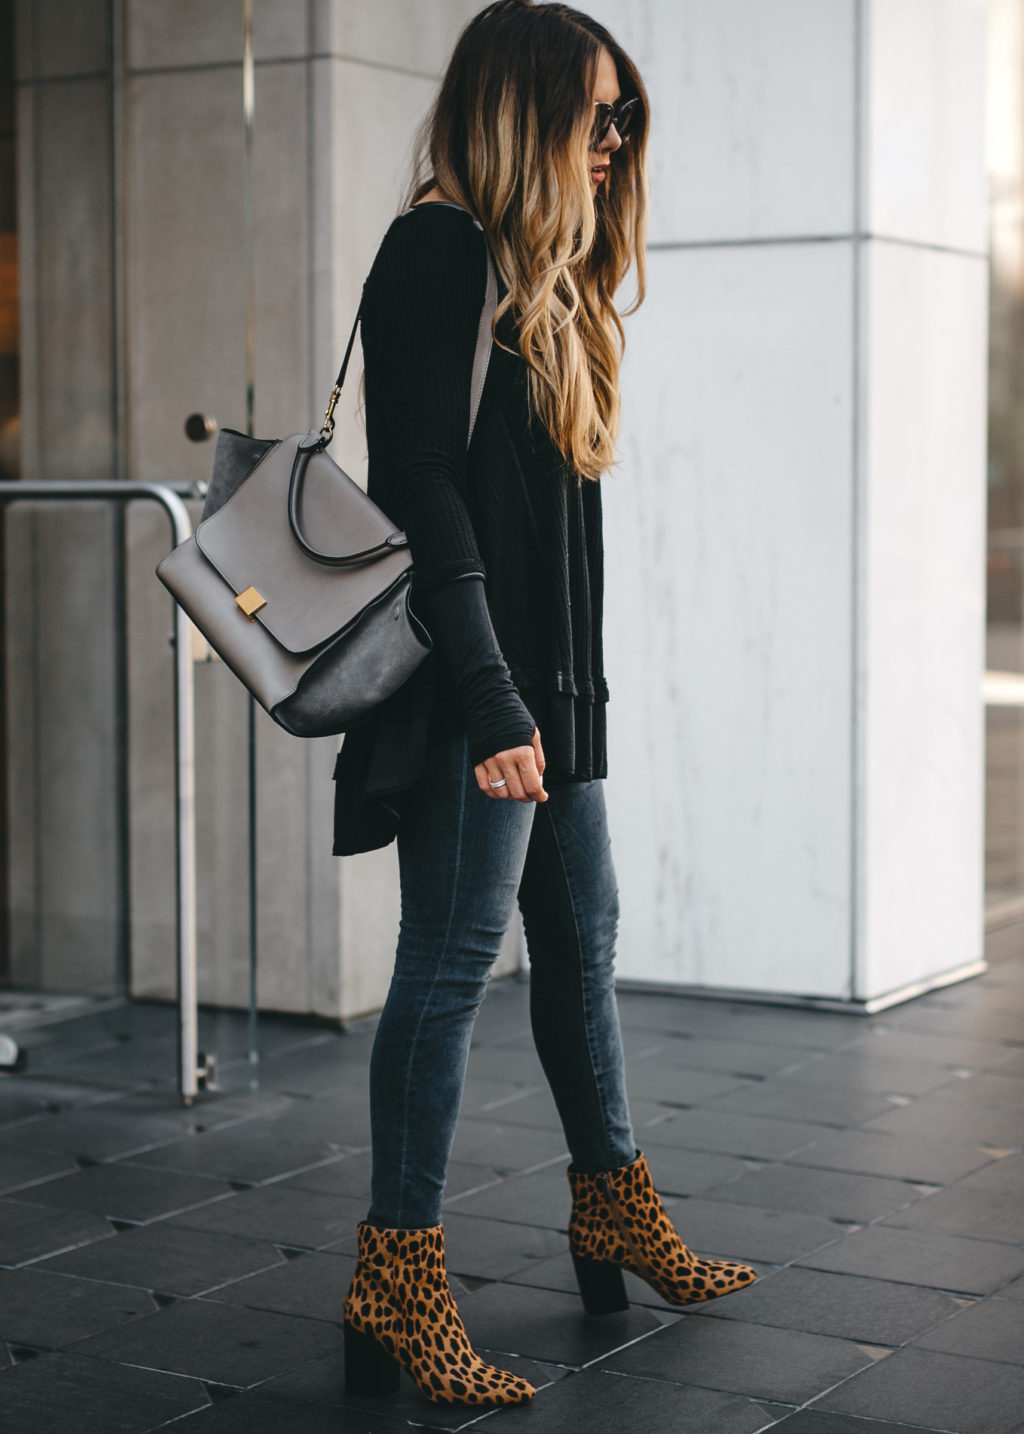 styling leopard booties